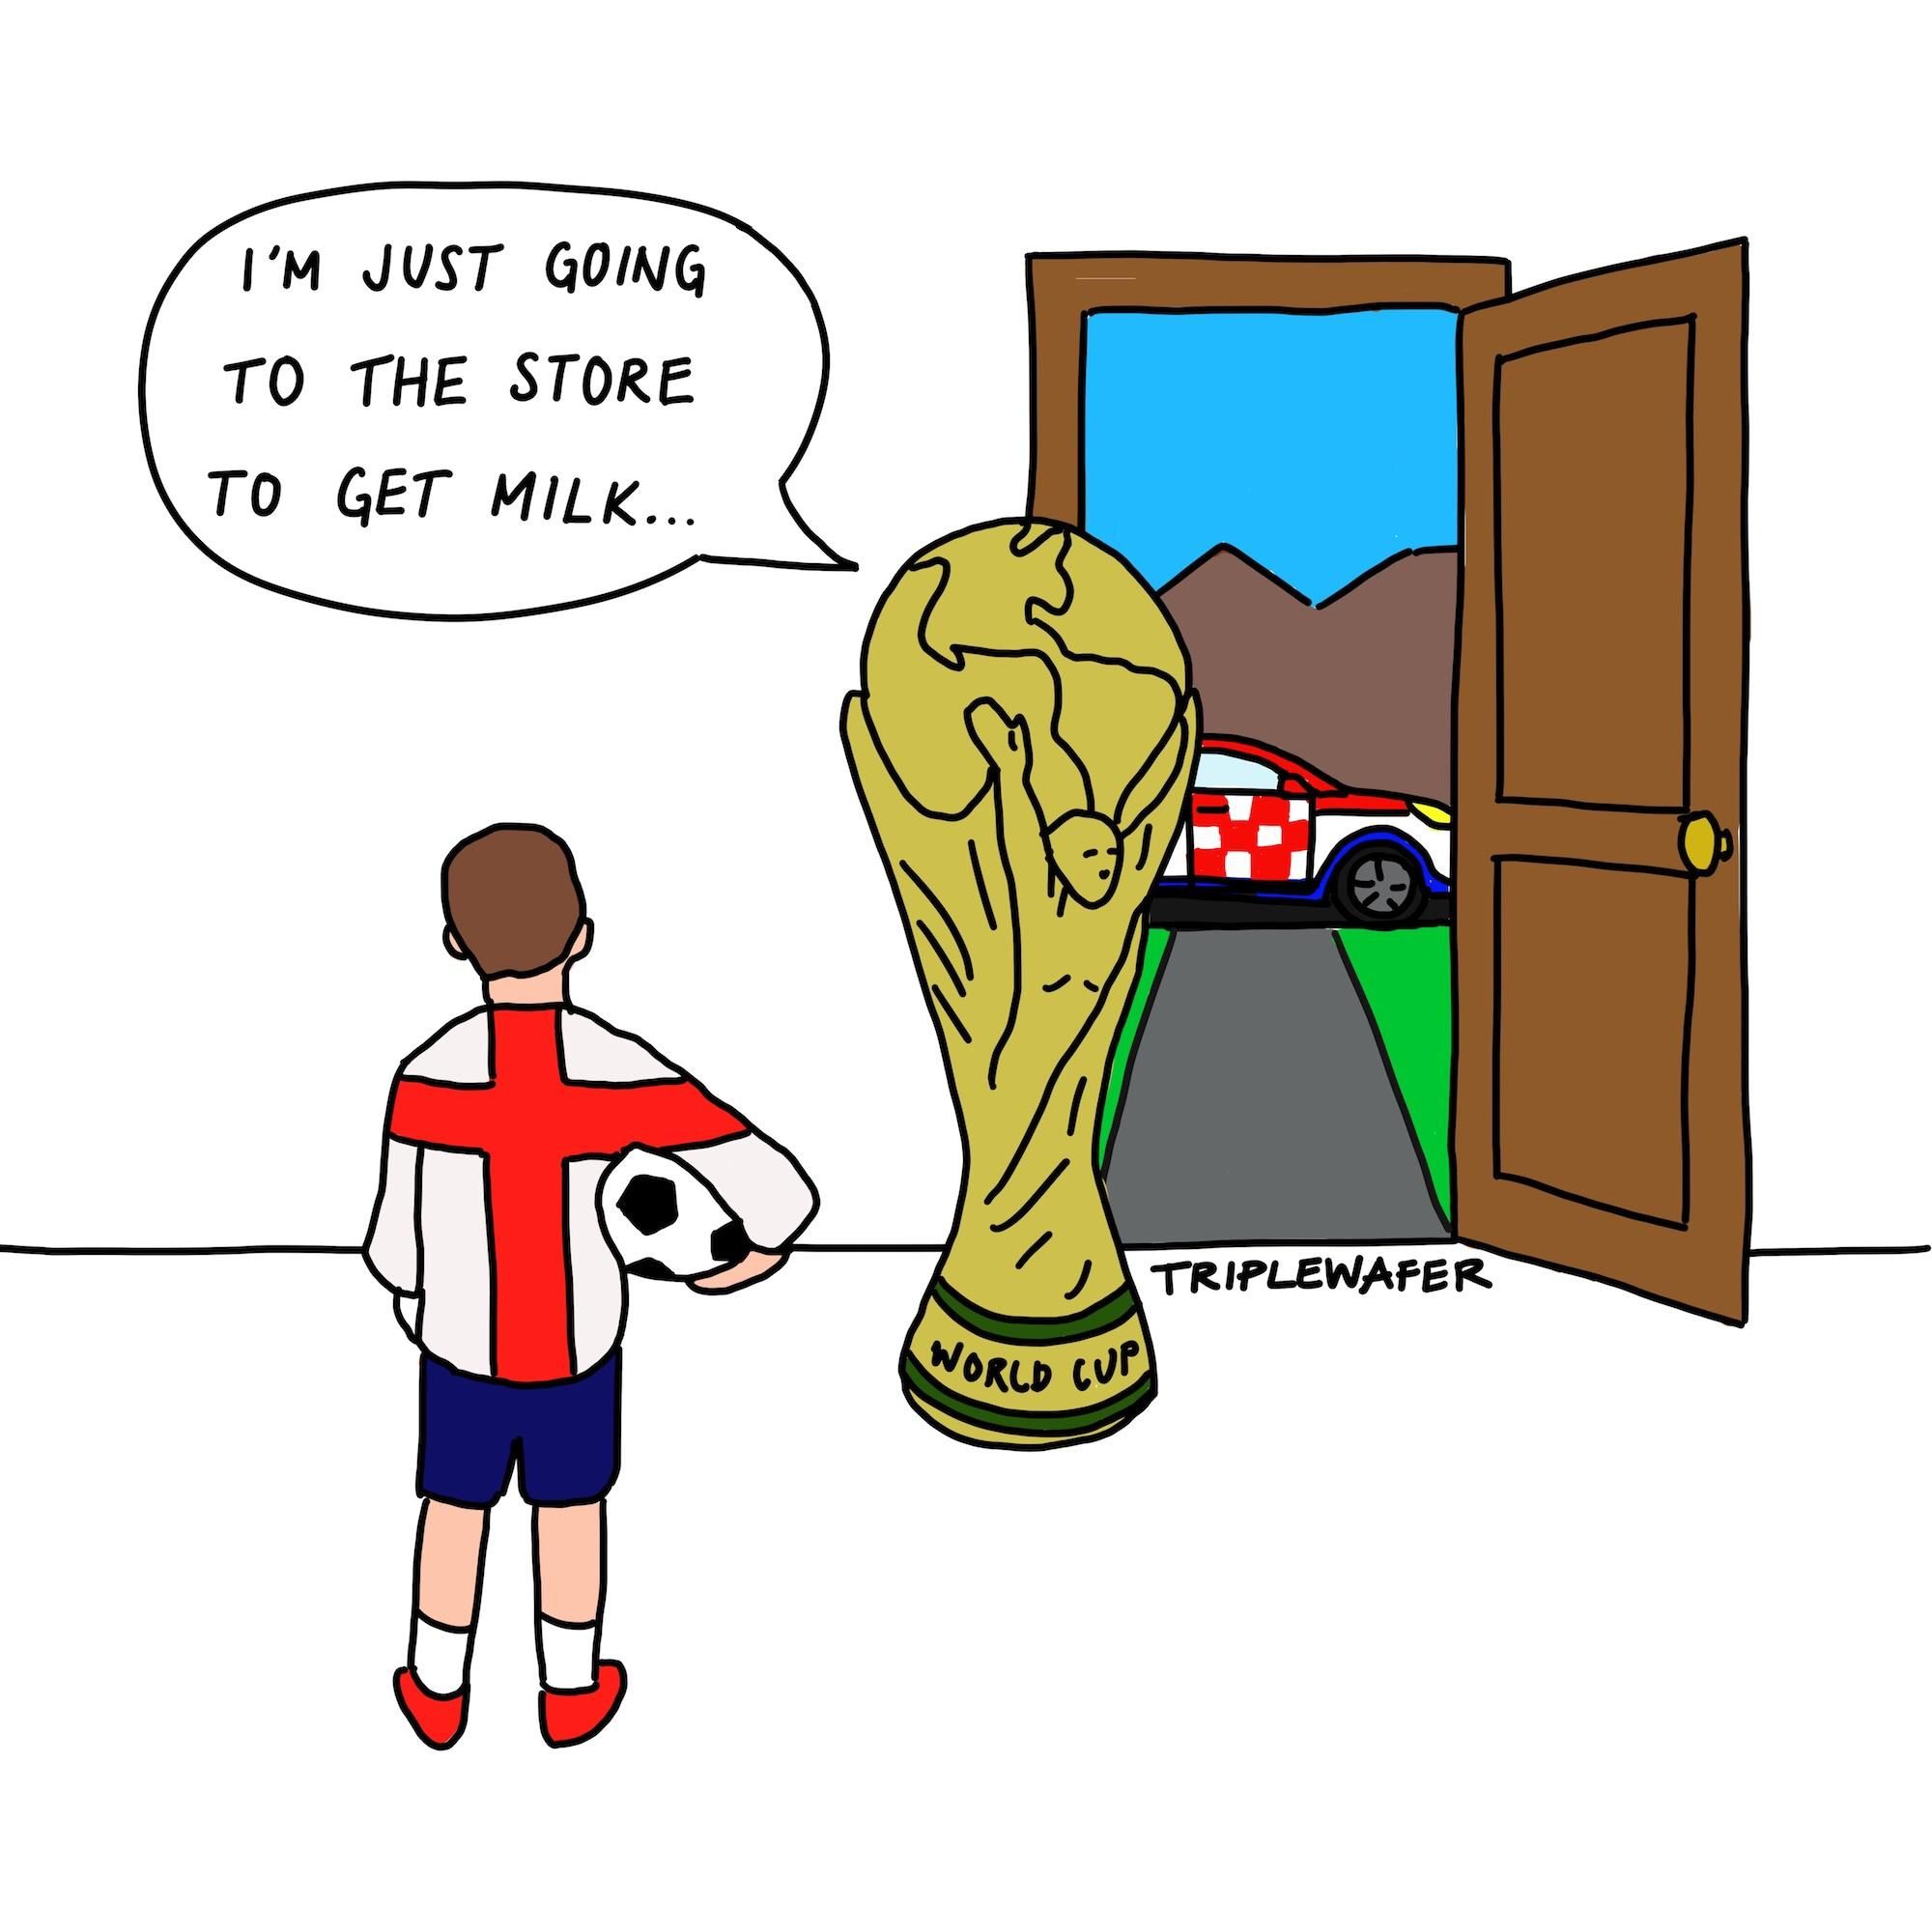 Football’s coming home